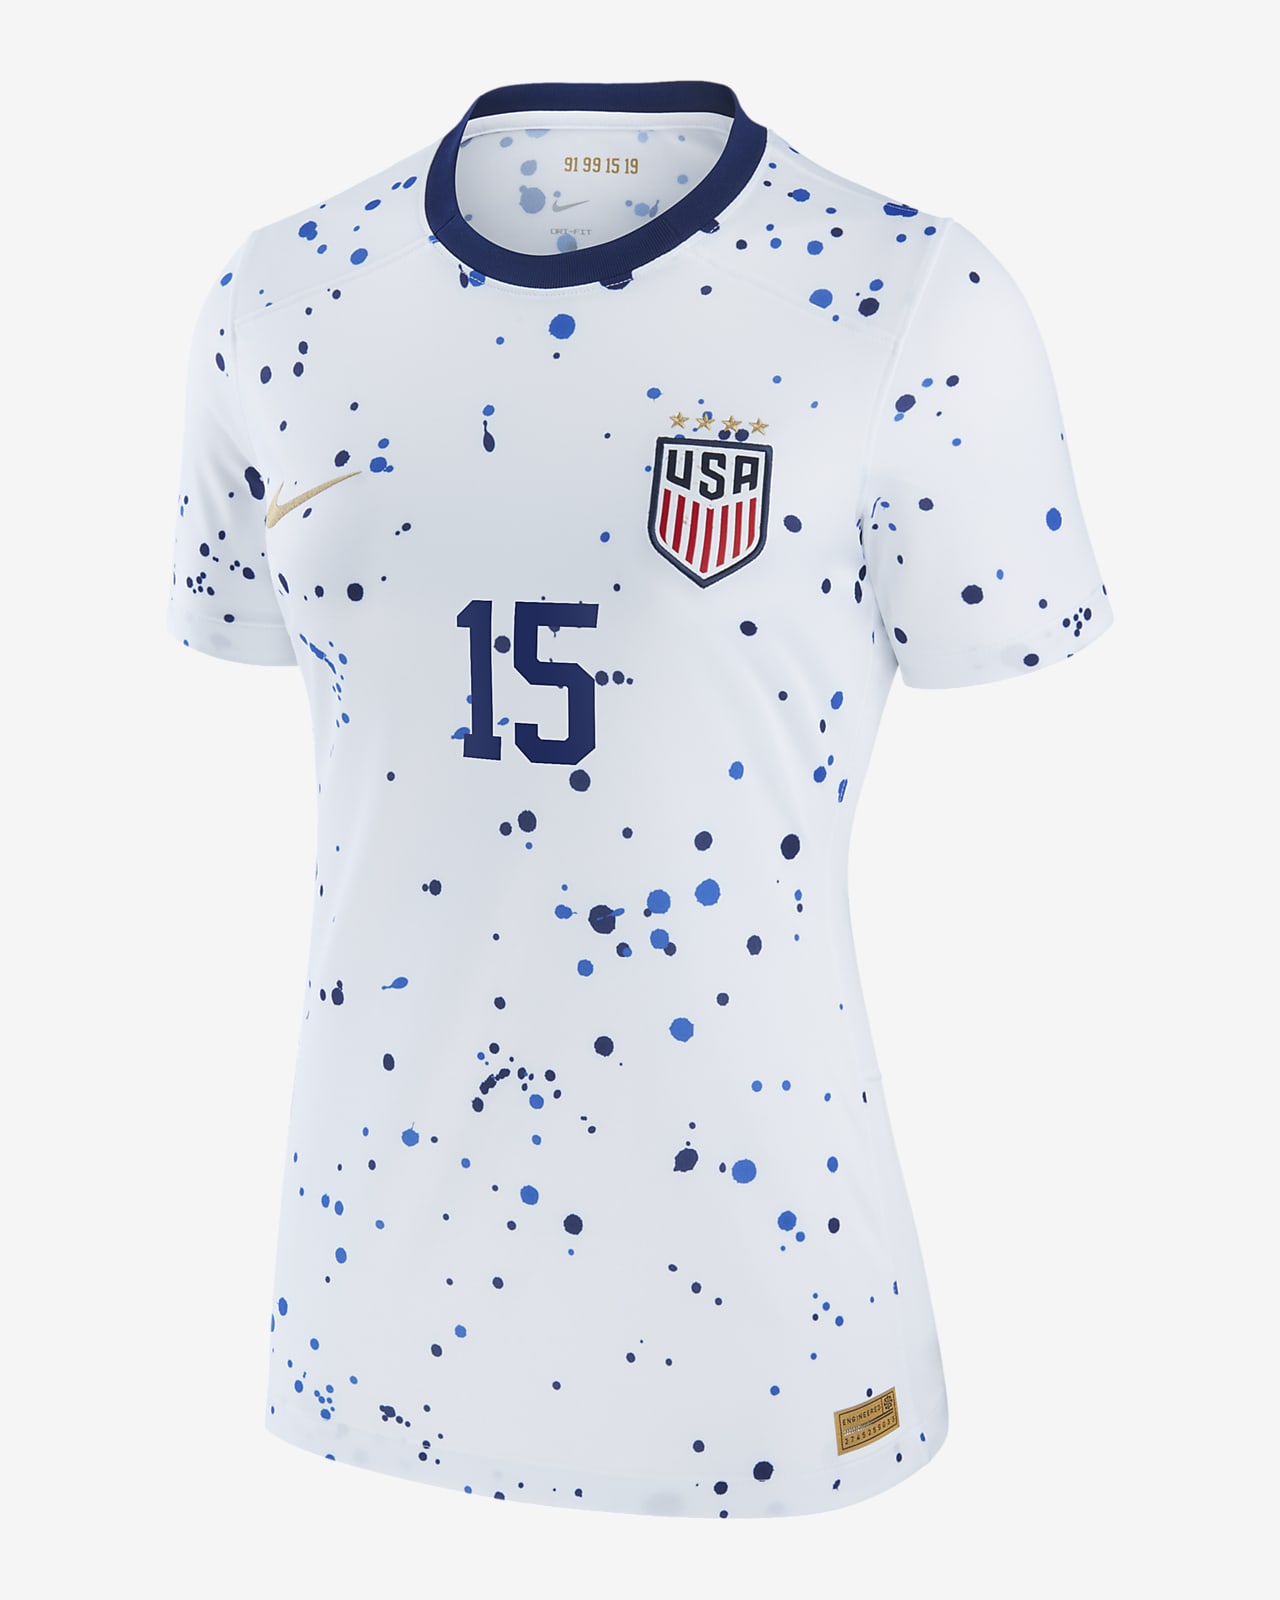 USWNT Home Jersey Sets New Sales Record as Nike.com's Most Sold